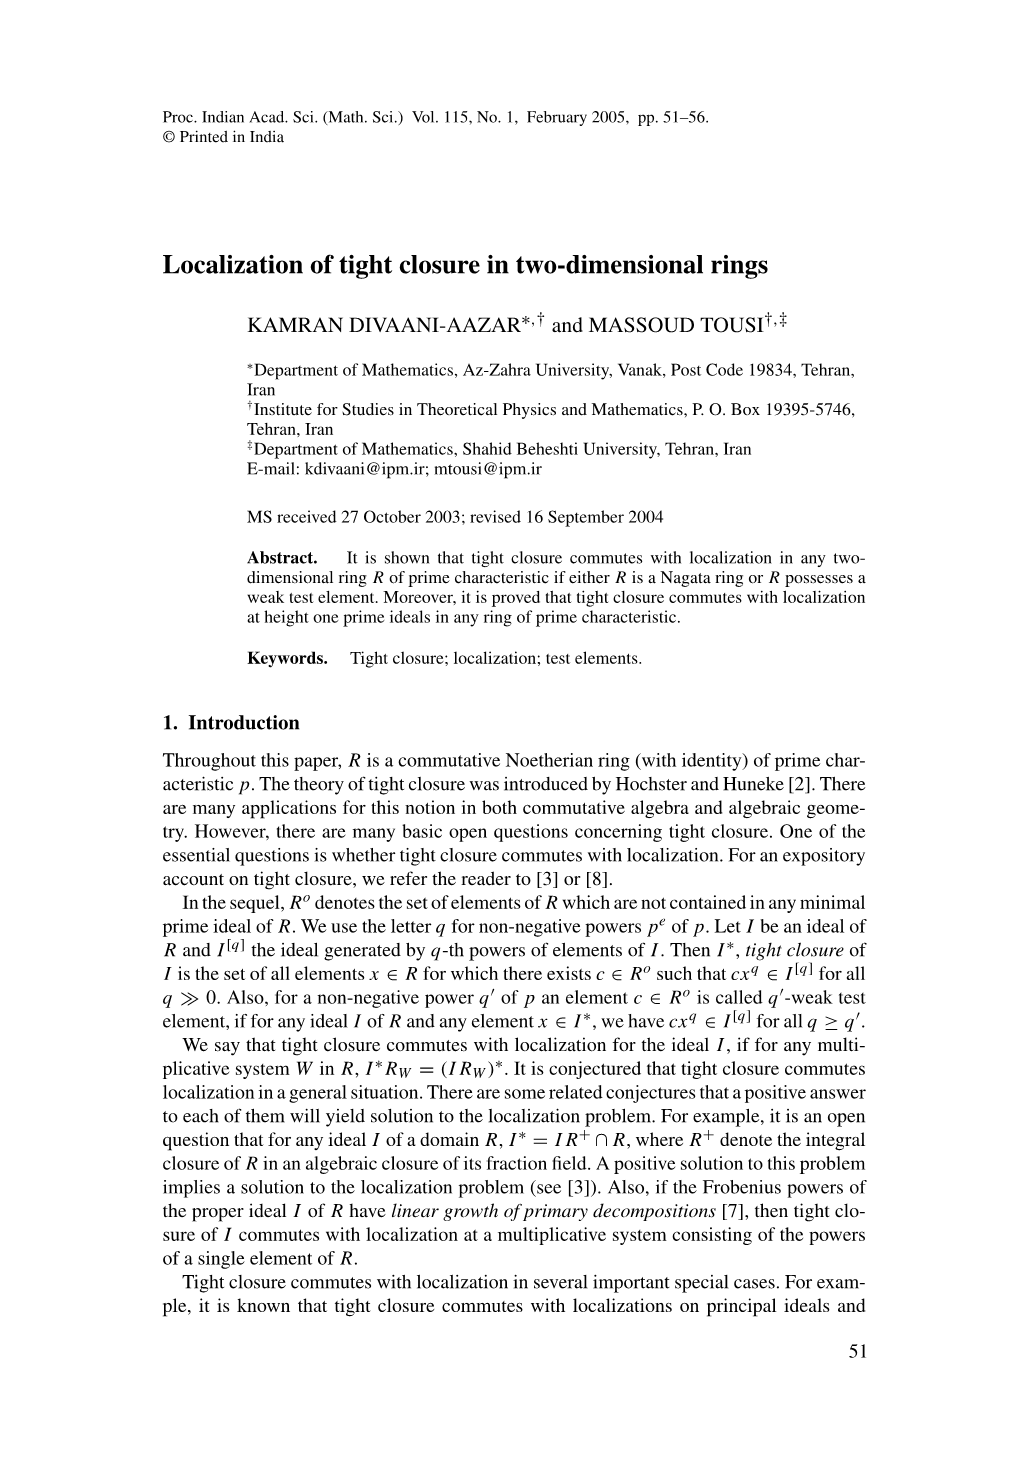 Localization of Tight Closure in Two-Dimensional Rings